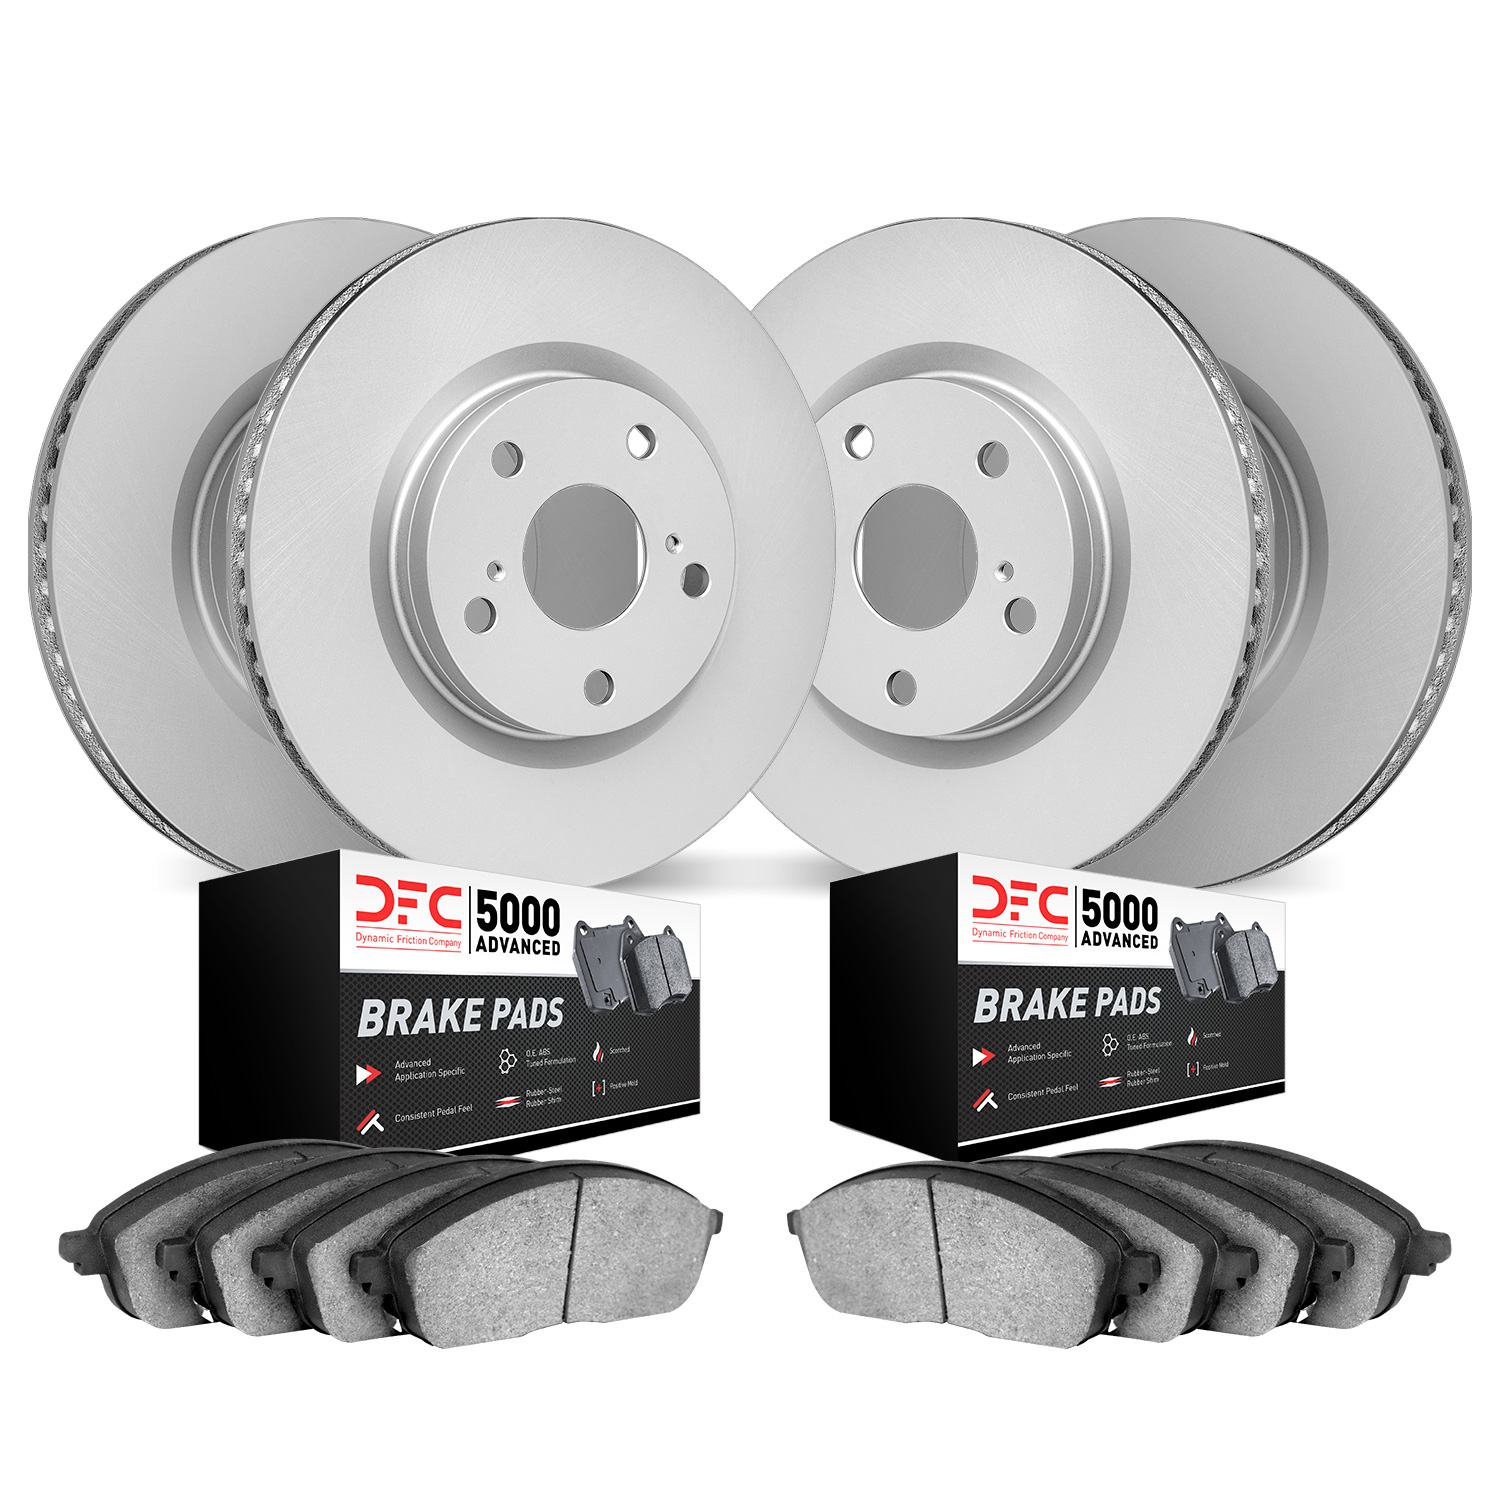 4504-56007 Geospec Brake Rotors w/5000 Advanced Brake Pads Kit, 2003-2011 Ford/Lincoln/Mercury/Mazda, Position: Front and Rear